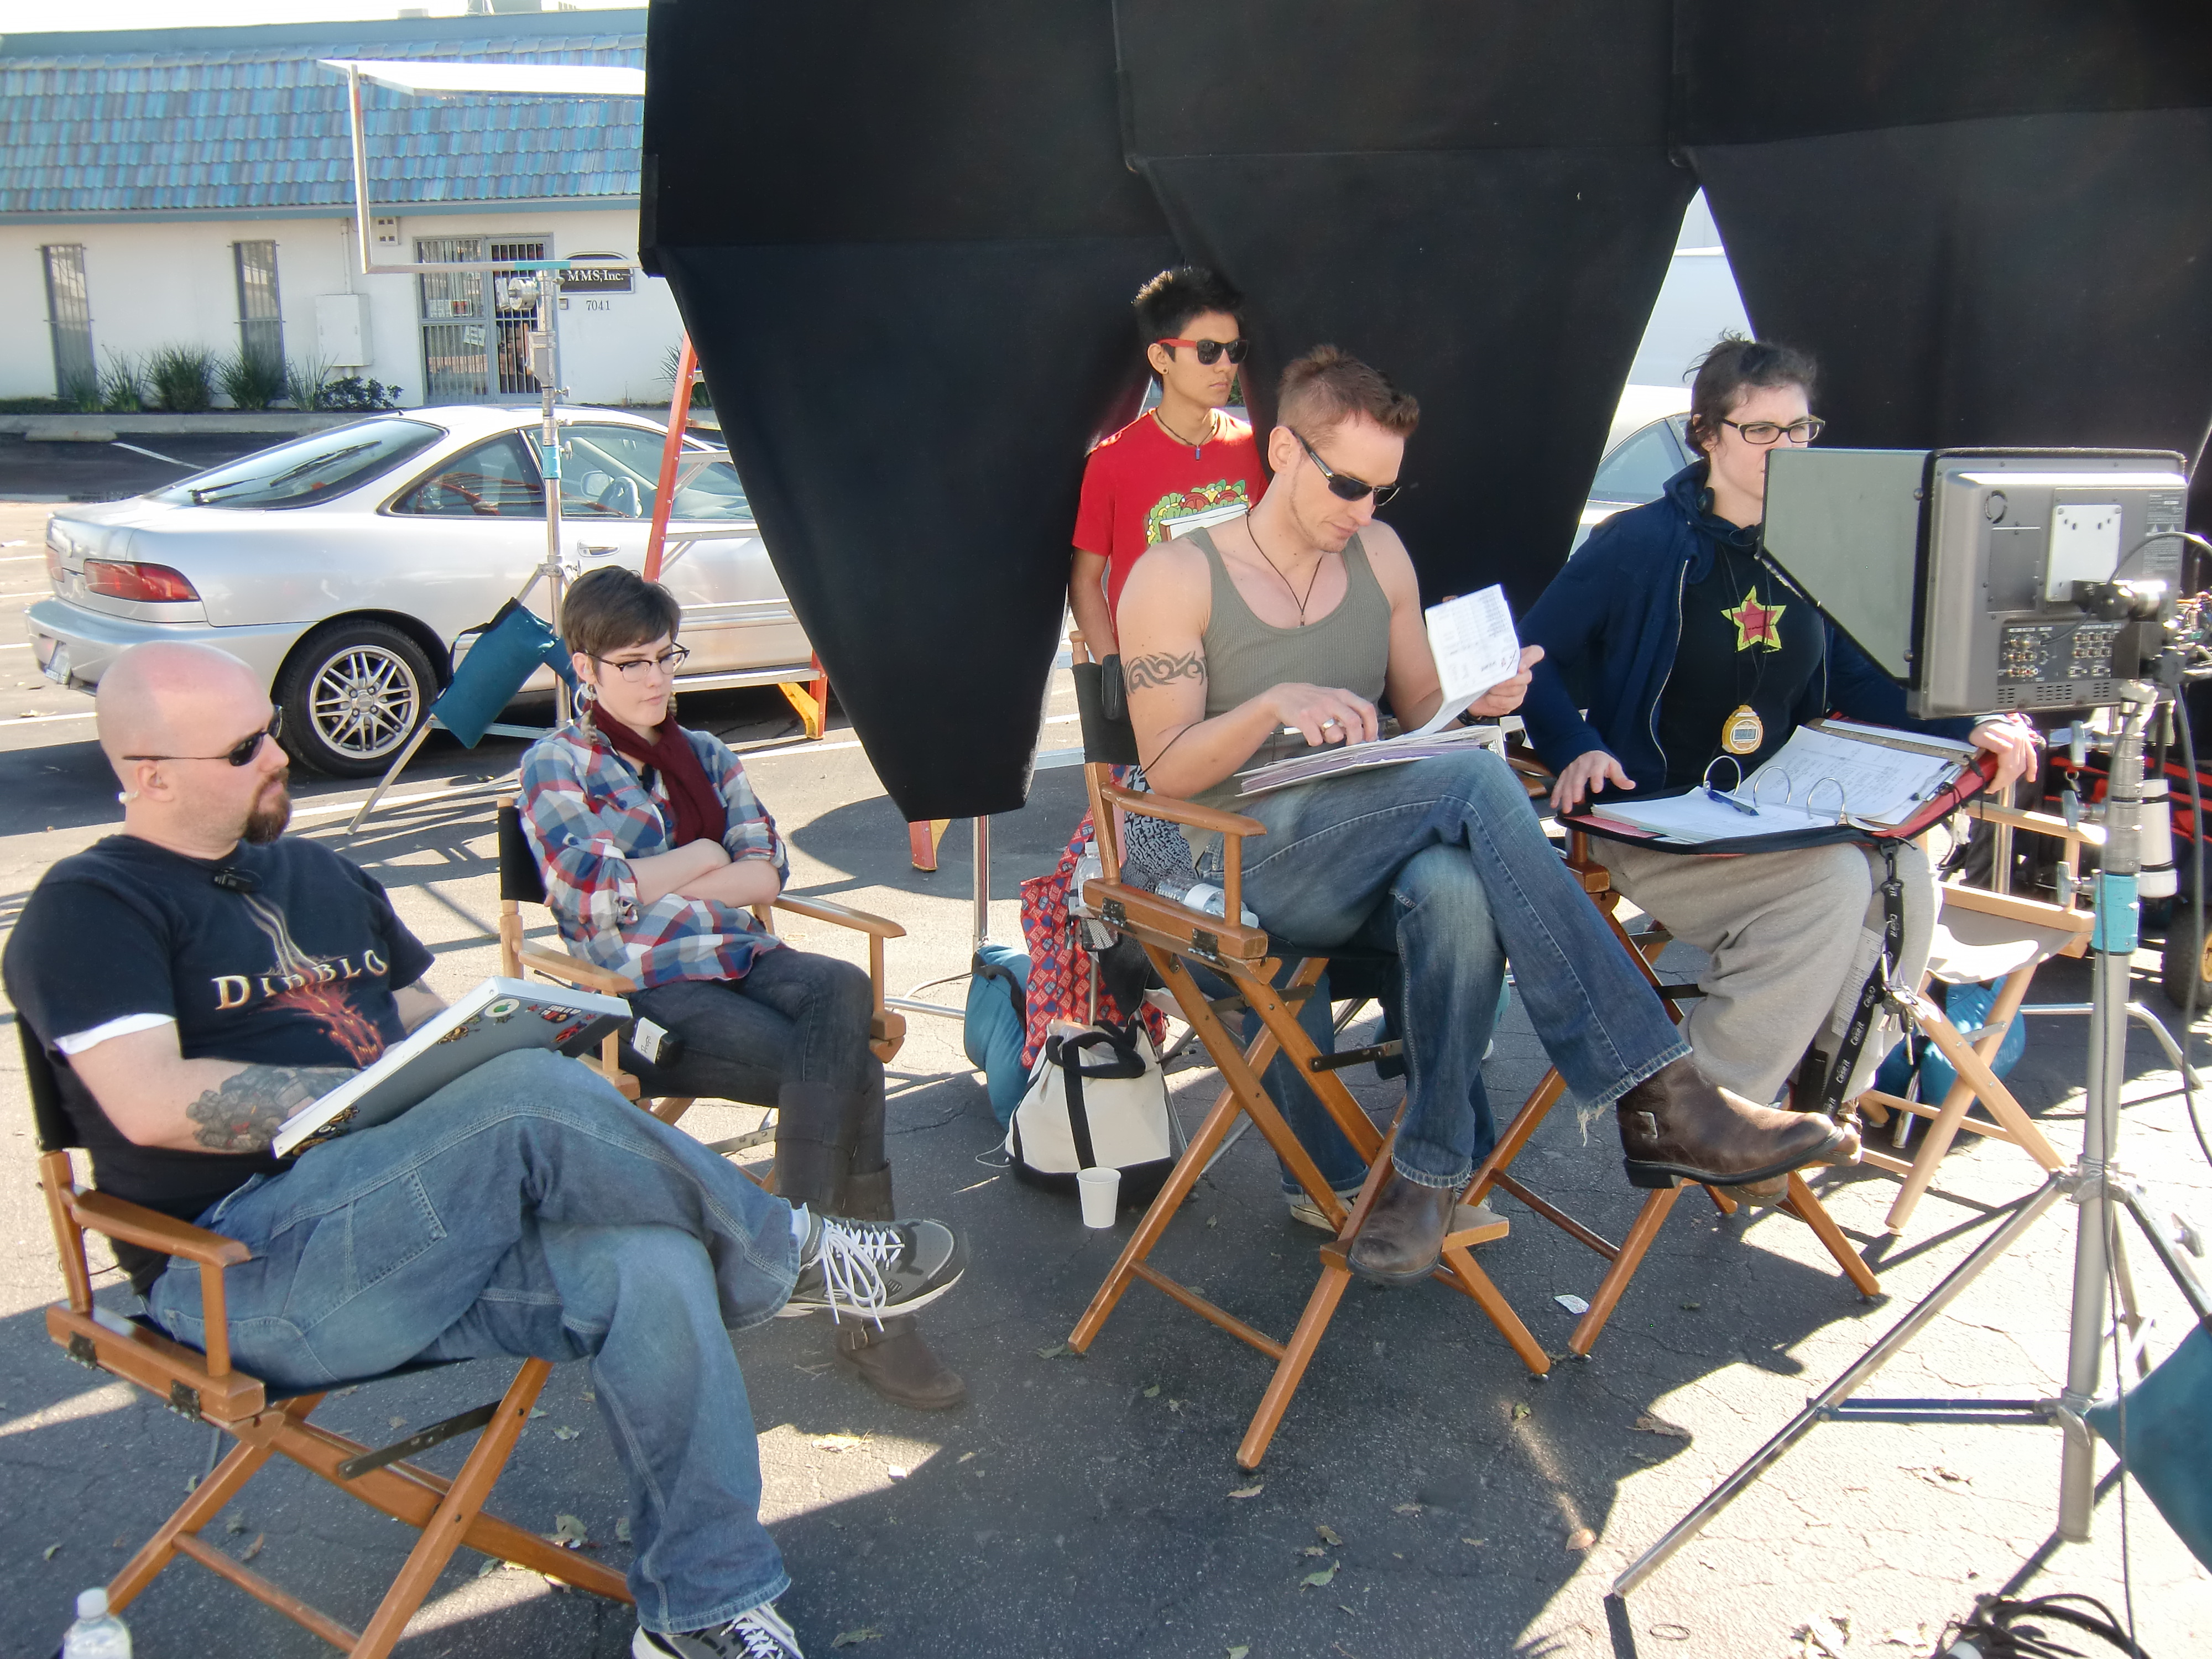 Director Casper Andreas and crew on the set of 